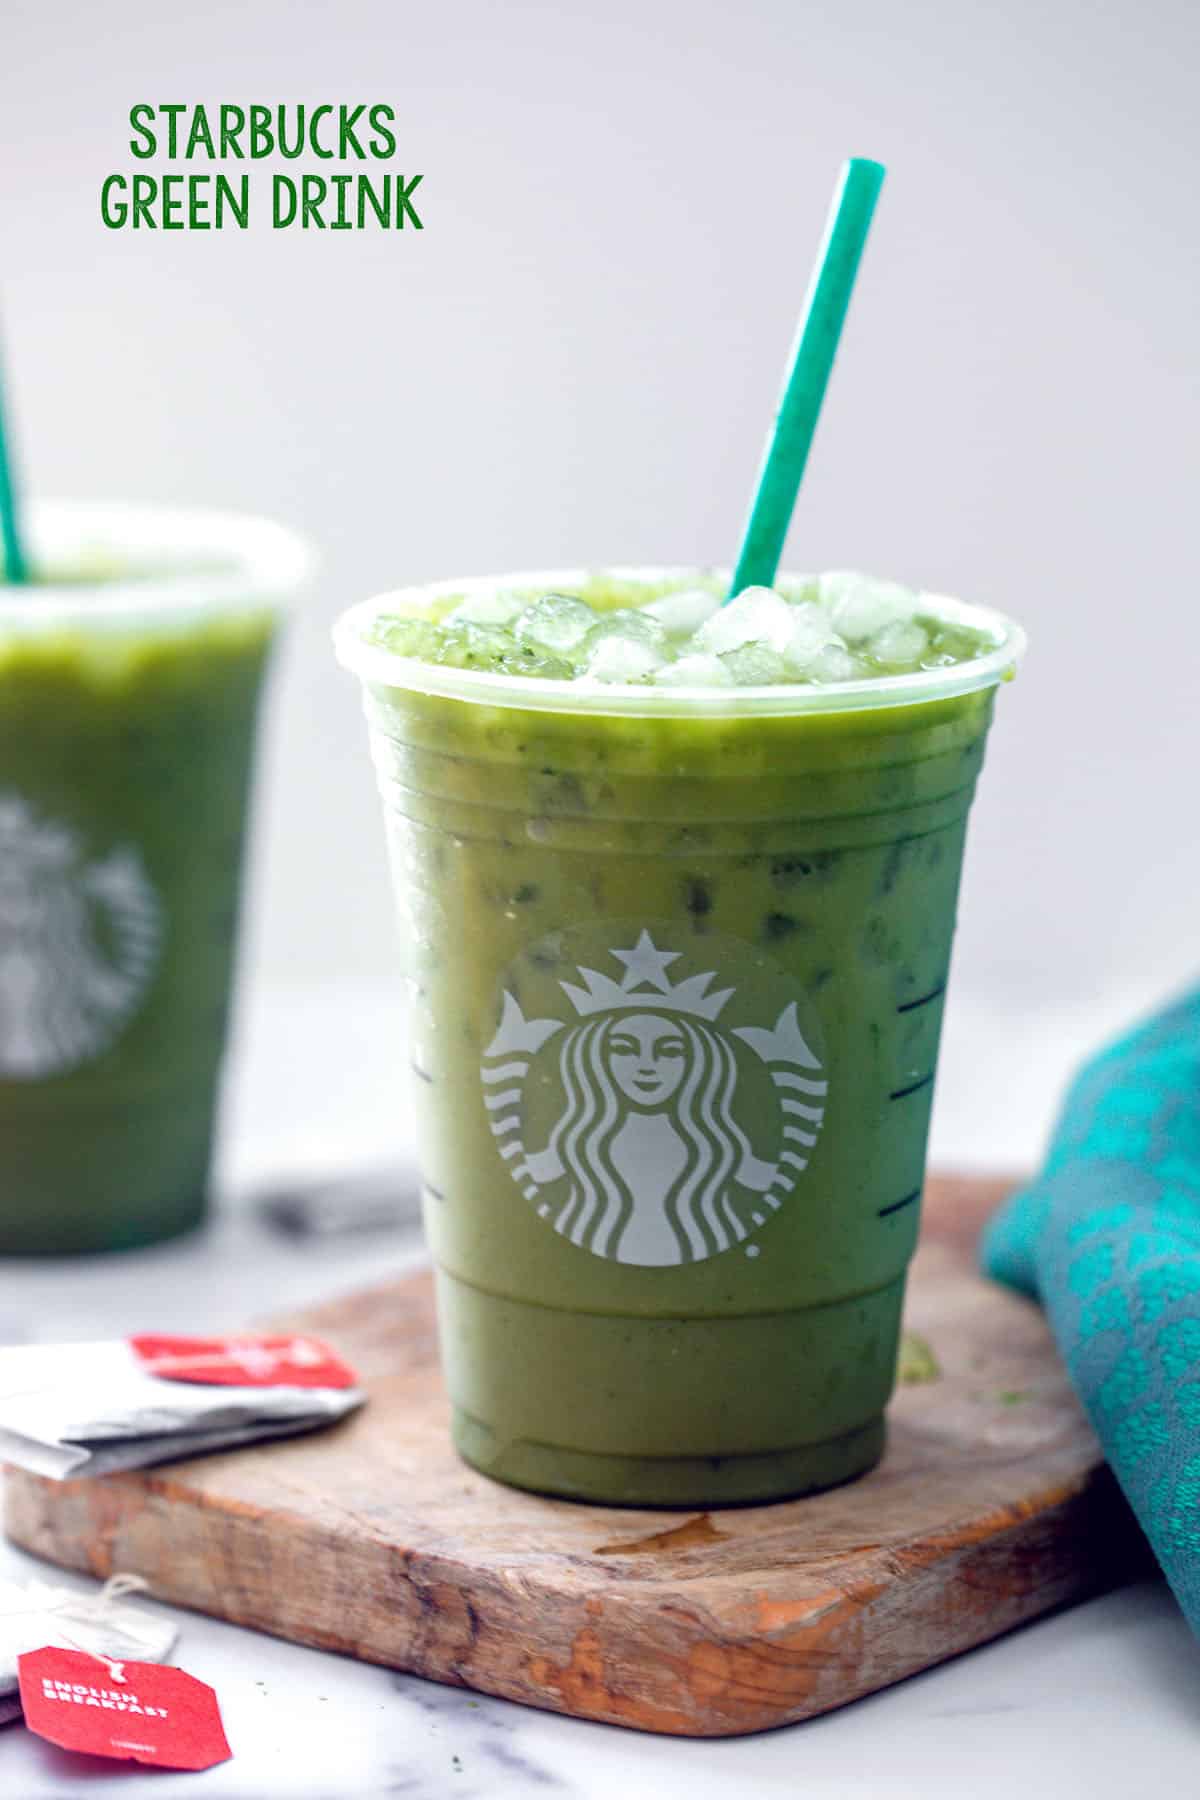 Head-on view of a Starbucks cup filled with Green Drink with black tea bags around the cup and the recipe title at top of image.